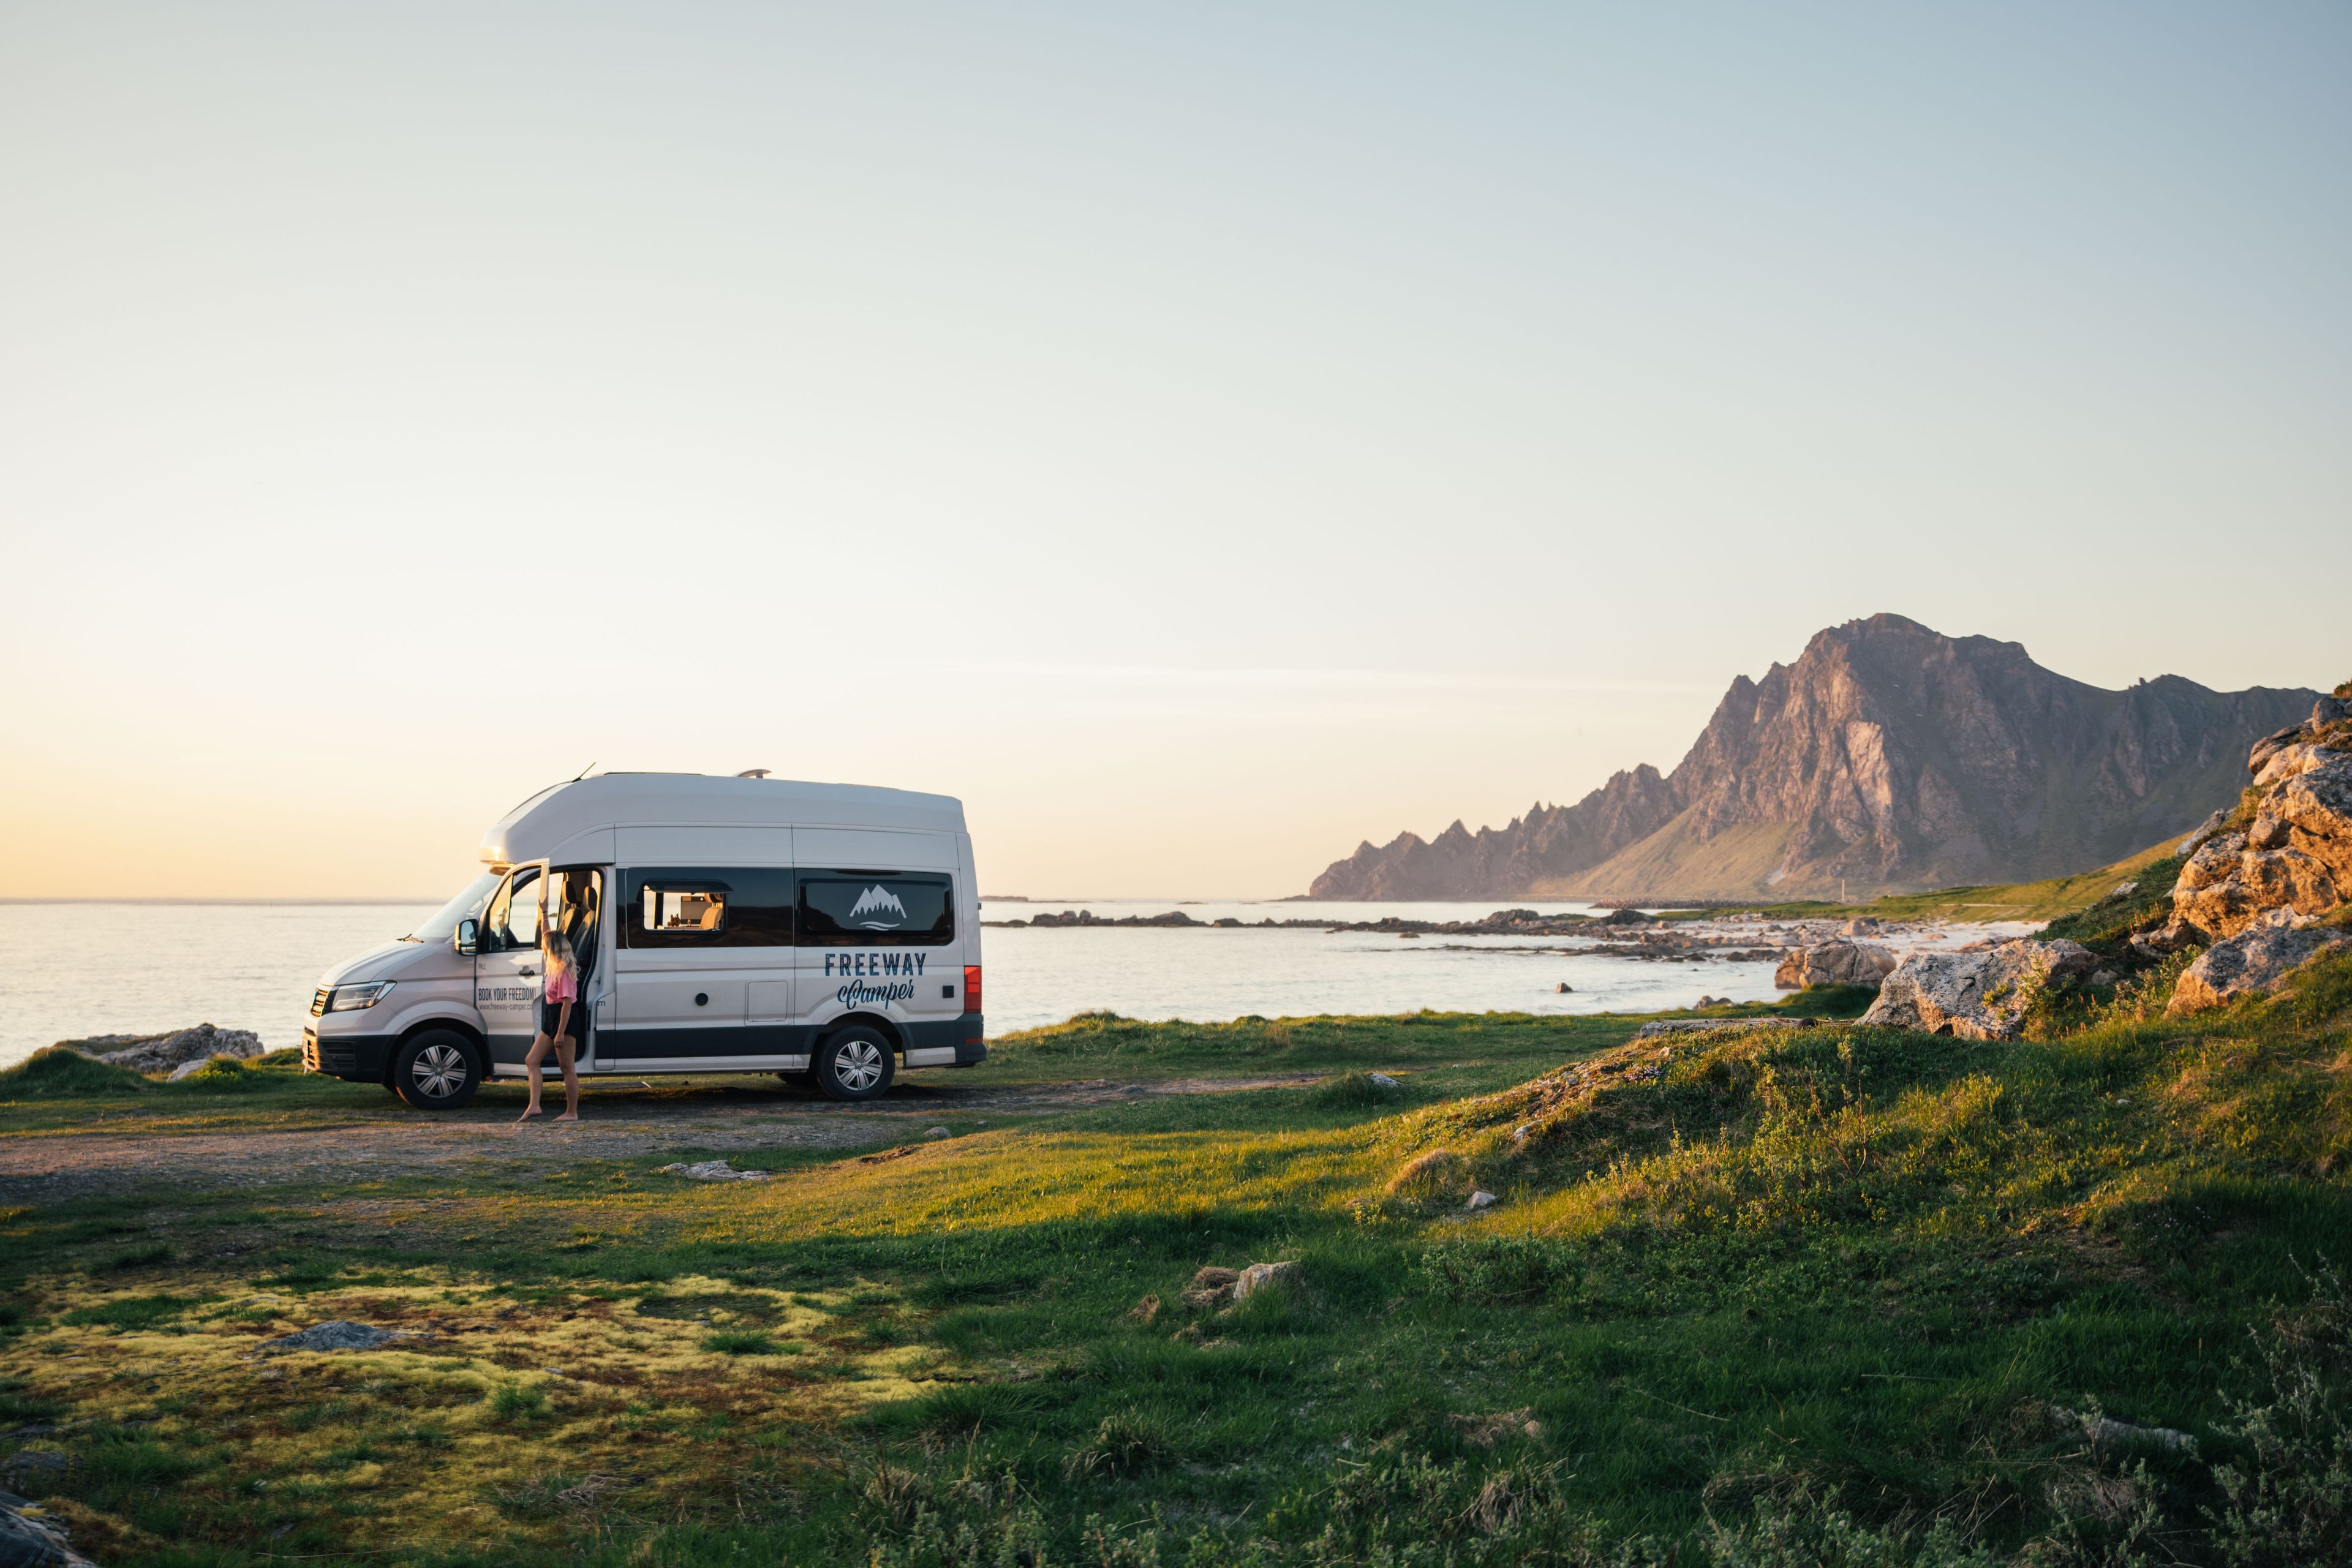 FWC Camper at the Norwegian coast, with sea and mountains in the background.